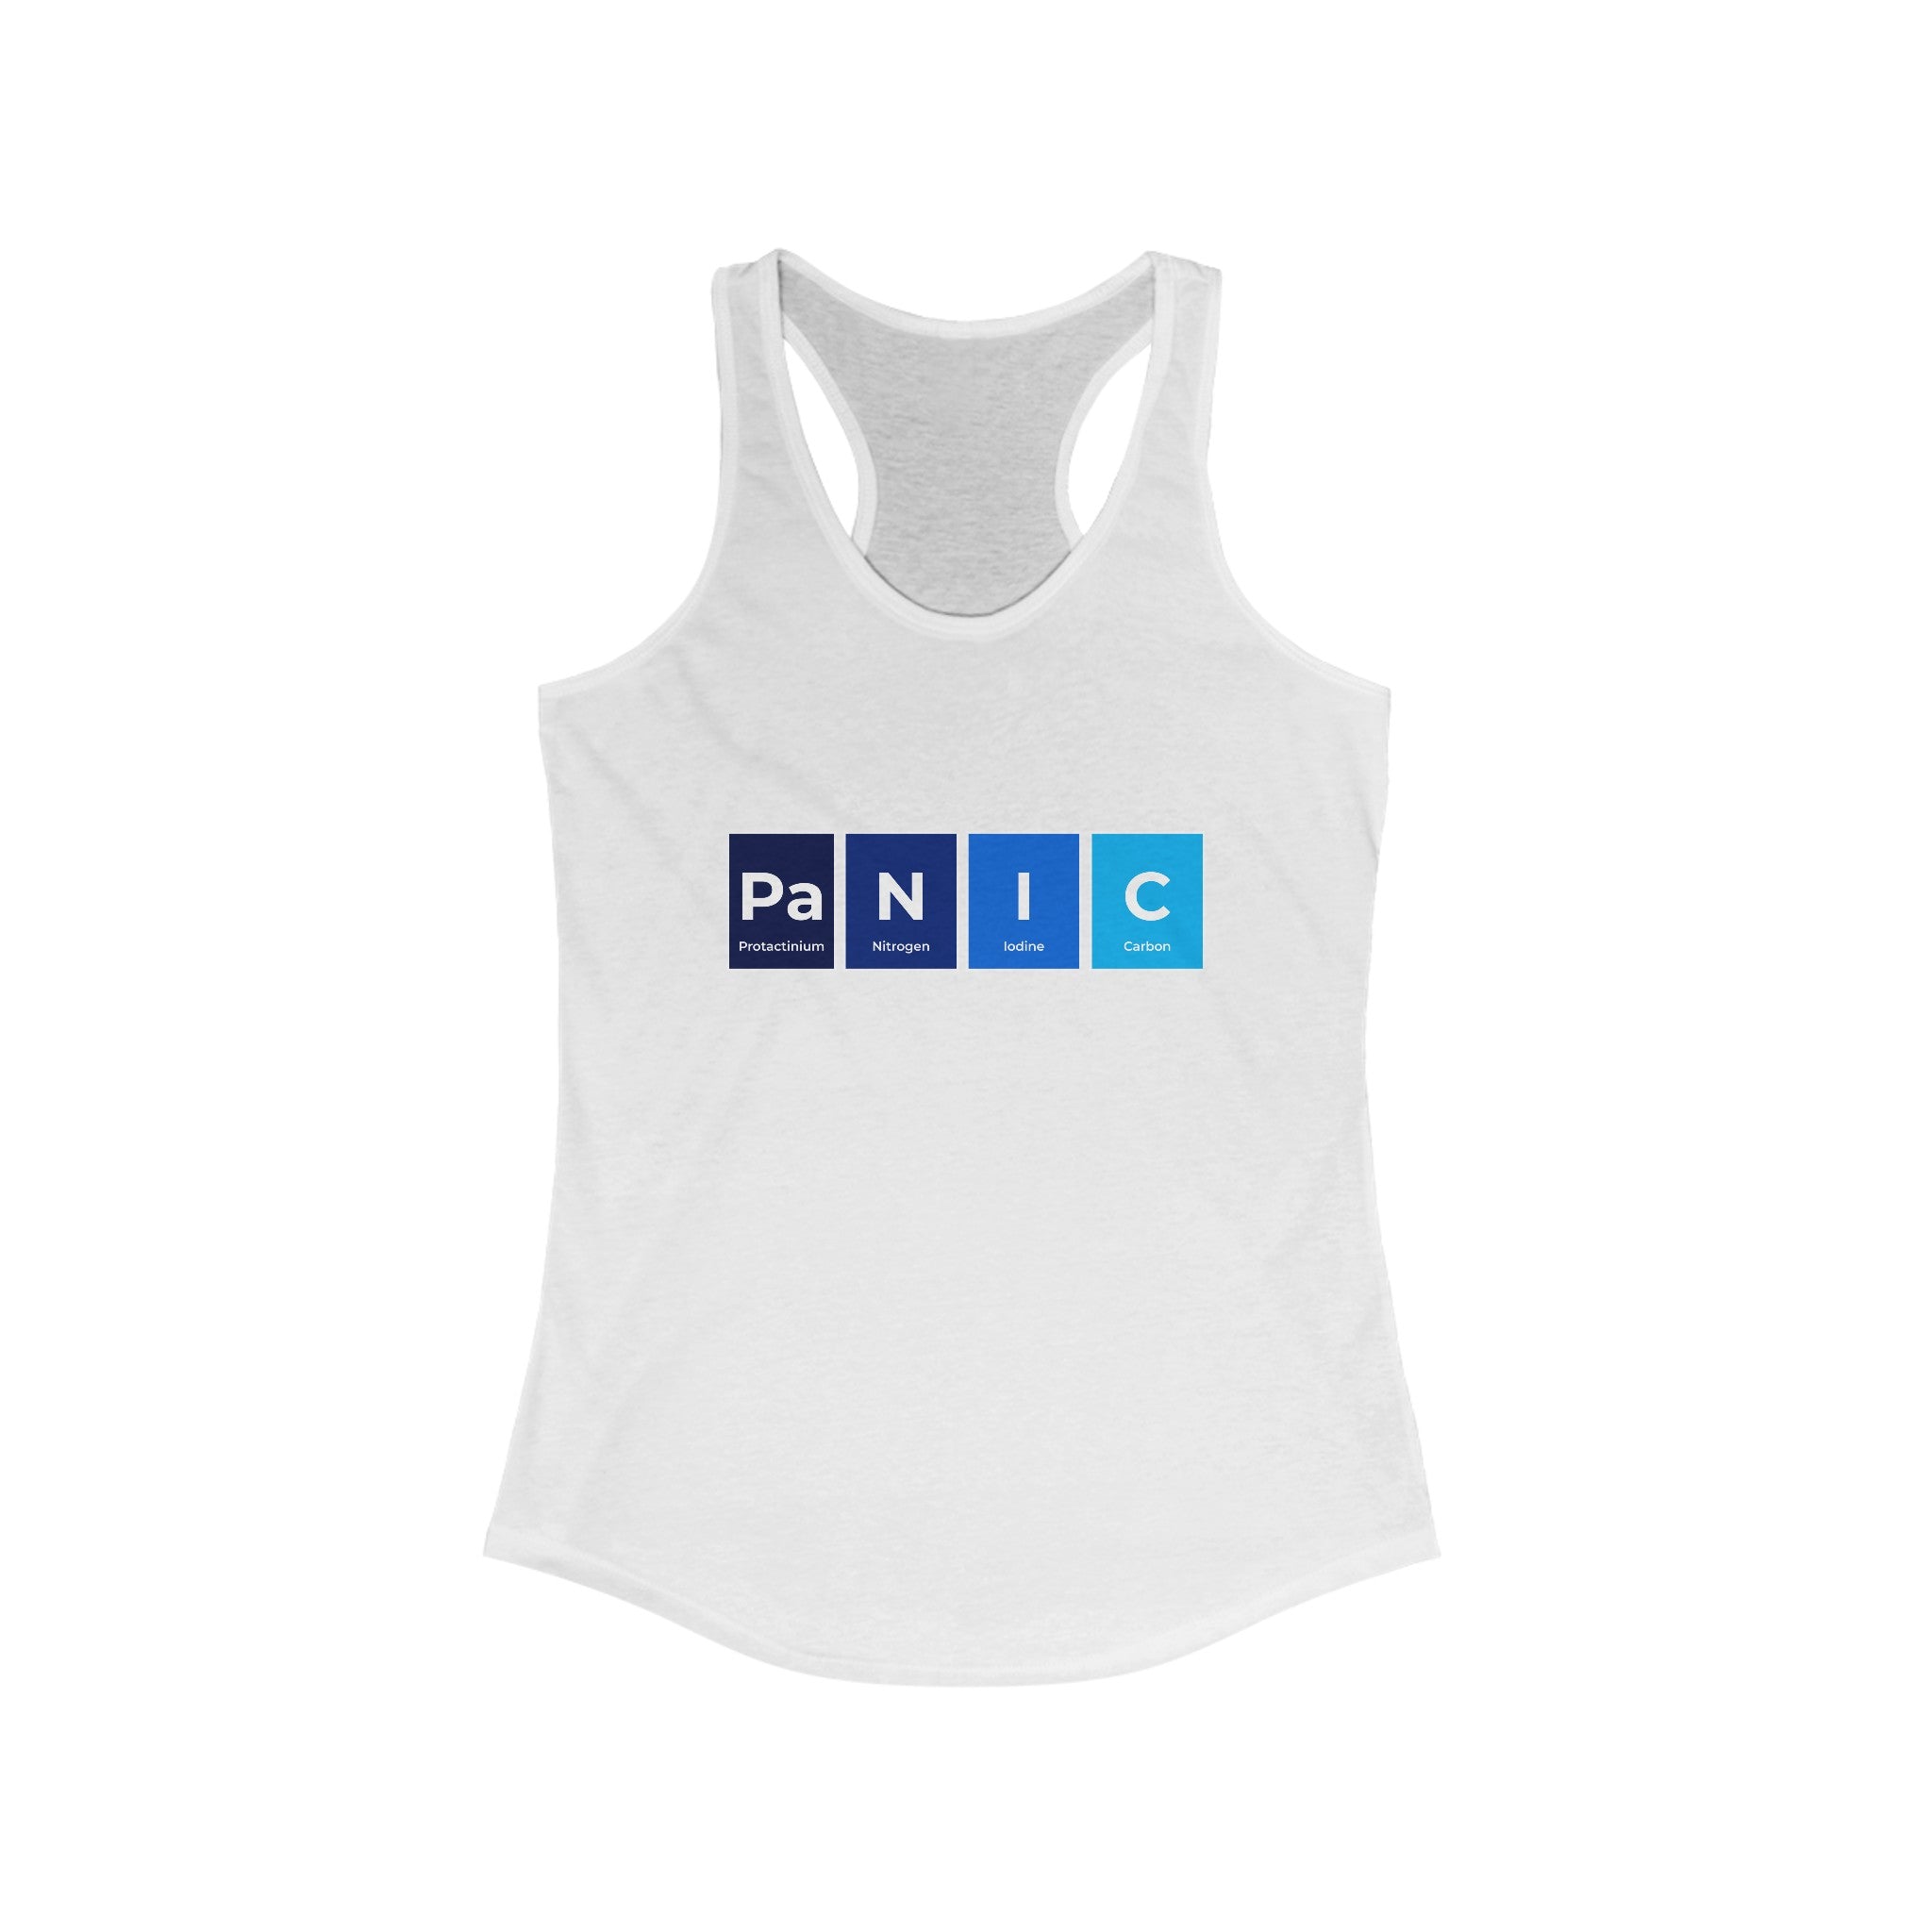 Pa-N-I-C - Women's Racerback Tank in white featuring the word "PANIC" displayed in blocks resembling the periodic table elements: Phosphorus (P), Nitrogen (N), Iodine (I), and Carbon (C). This lightweight tank top boasts an athletic style, perfect for both casual wear and workouts.